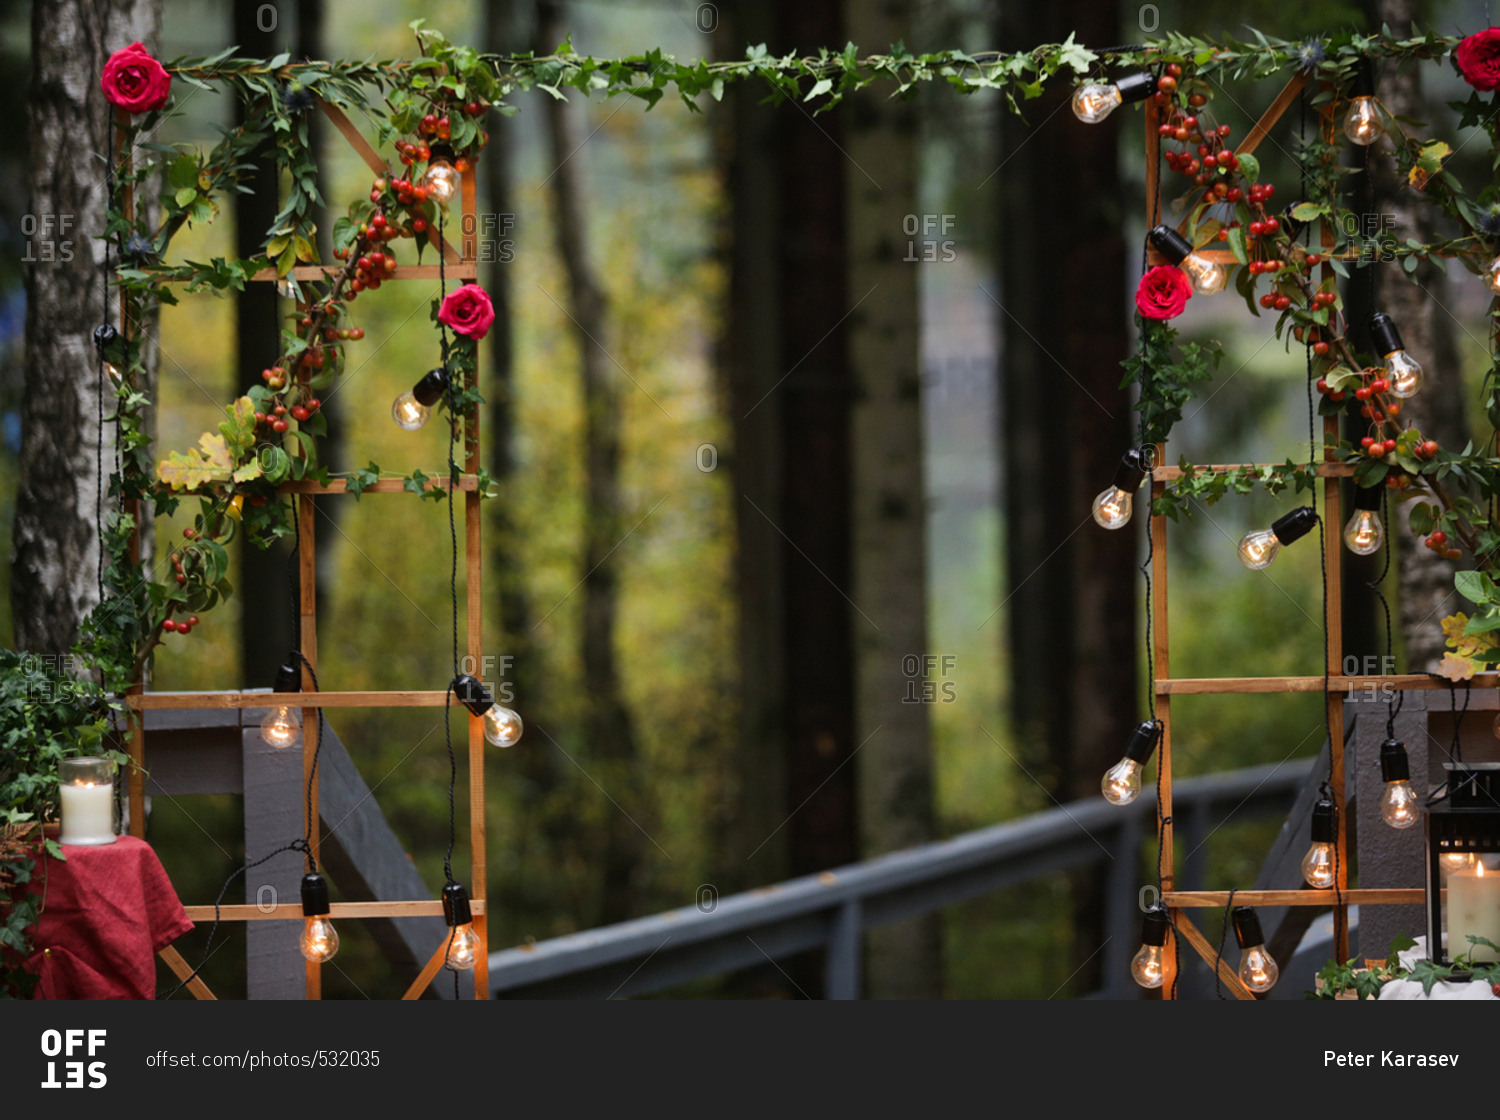 Wedding arbor with lights and flowers on a trellis